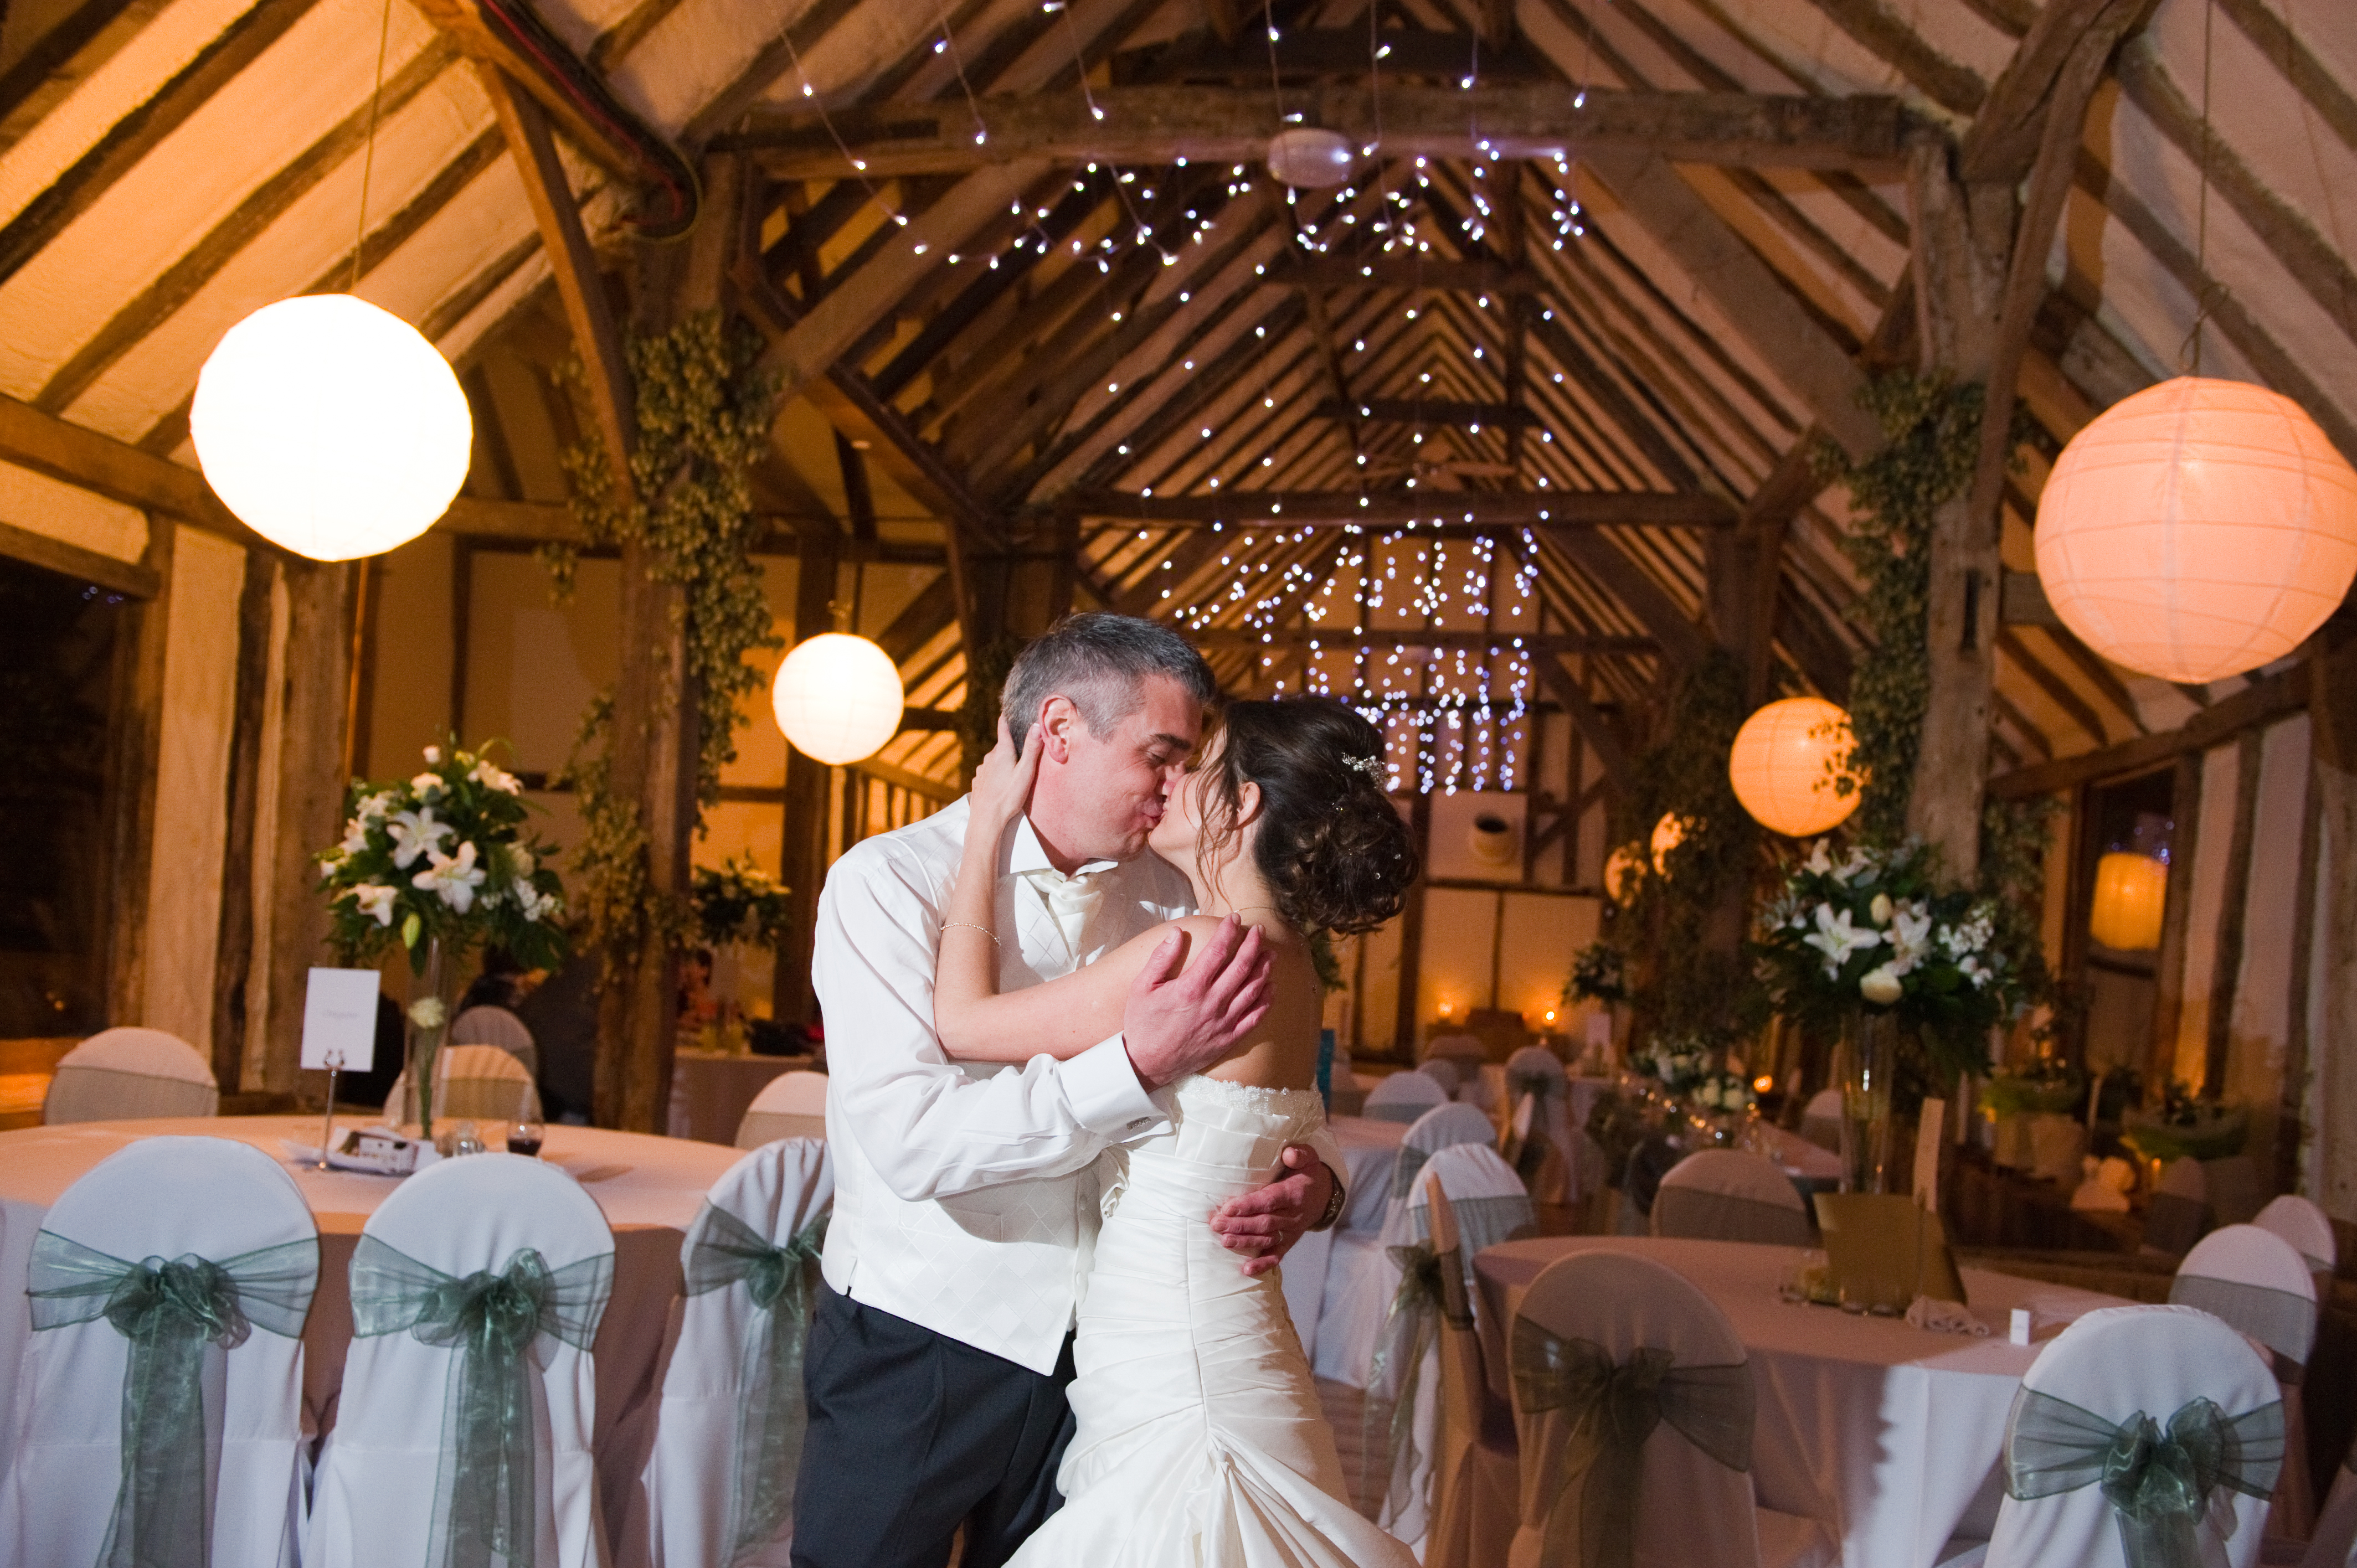 The bride and groom share a kiss at their Winters Barn wedding